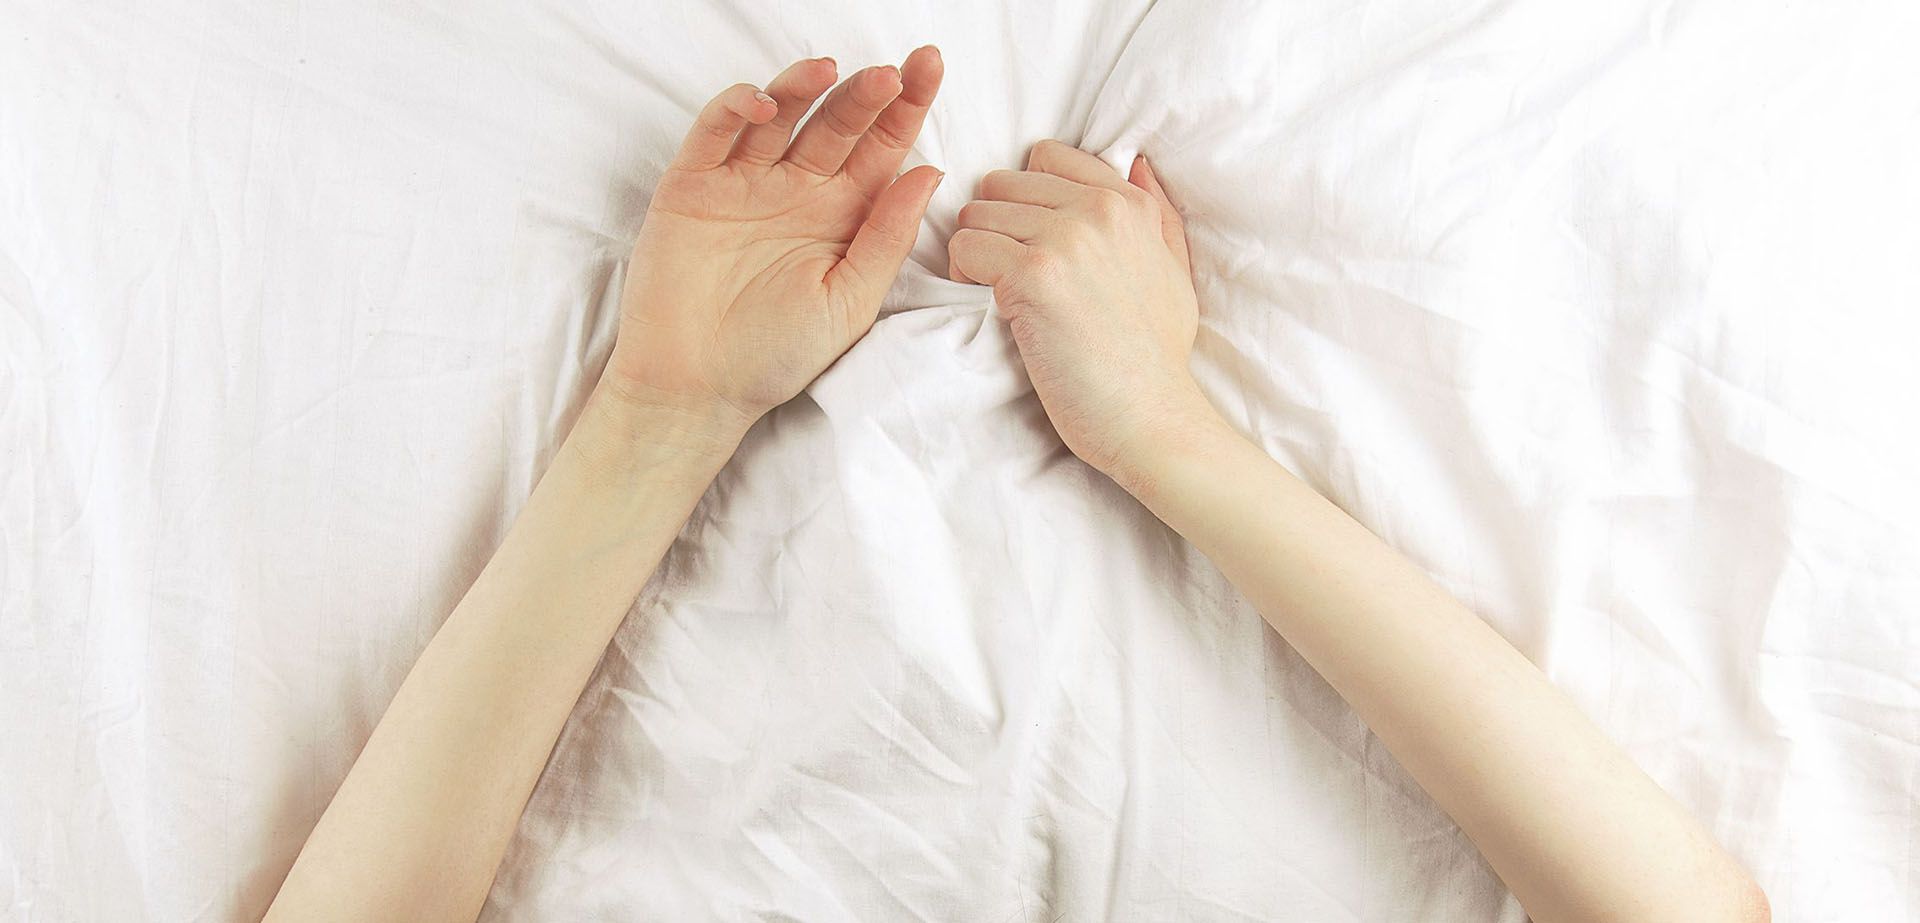 Female hands on the bed.